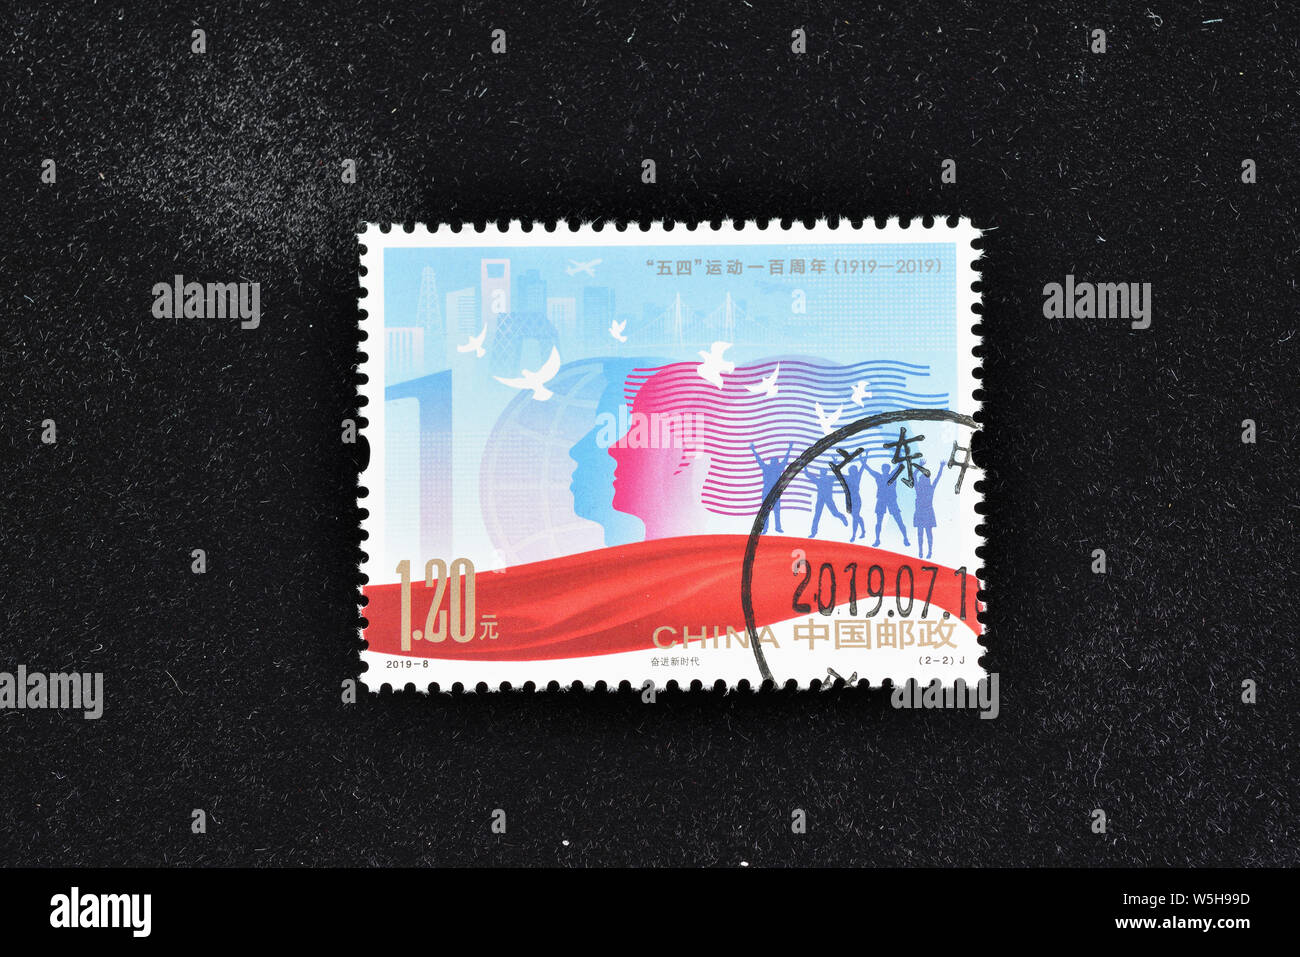 CHINA - CIRCA 2019: A stamp printed in China shows 2019-8 100th Annivery of May 4th Movement (2-1), Inheriting May 4th Movement Spirit, 120 fen, 44 * Stock Photo